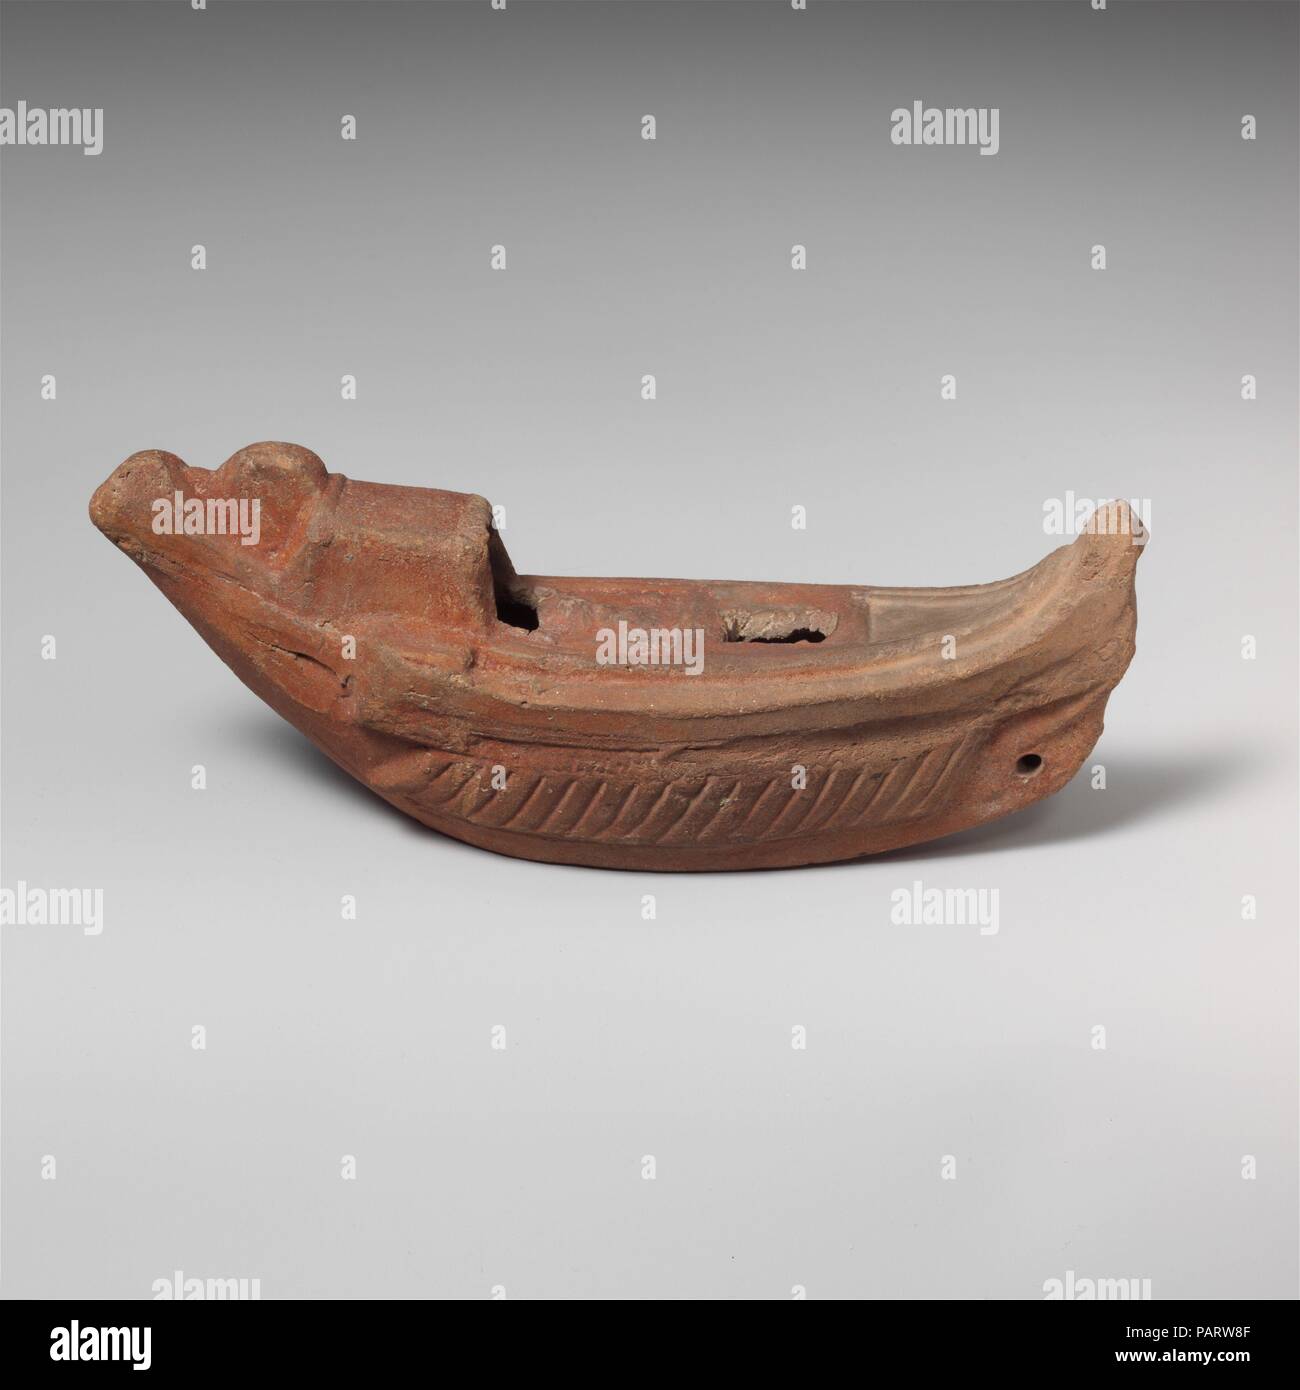 Terracotta oil lamp in the shape of a boat. Culture: Roman, Egyptian. Dimensions: length  6 1/4in. (15.9cm). Date: 2nd century A.D..  Lamp in the form of a boat. Museum: Metropolitan Museum of Art, New York, USA. Stock Photo